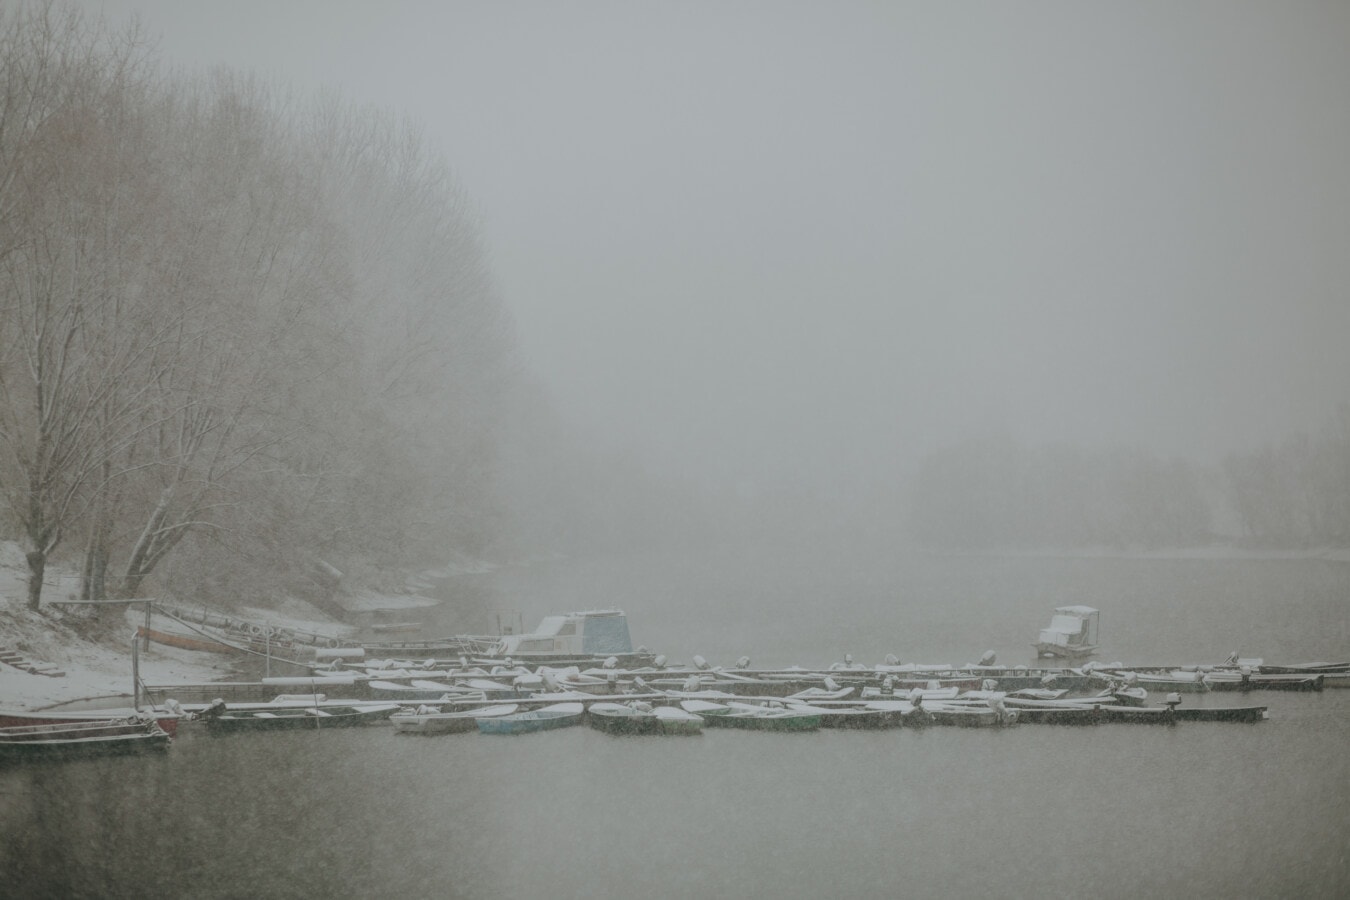 foggy, snowflakes, snowstorm, lakeside, harbour, cold, bad weather, temperature, snow, water